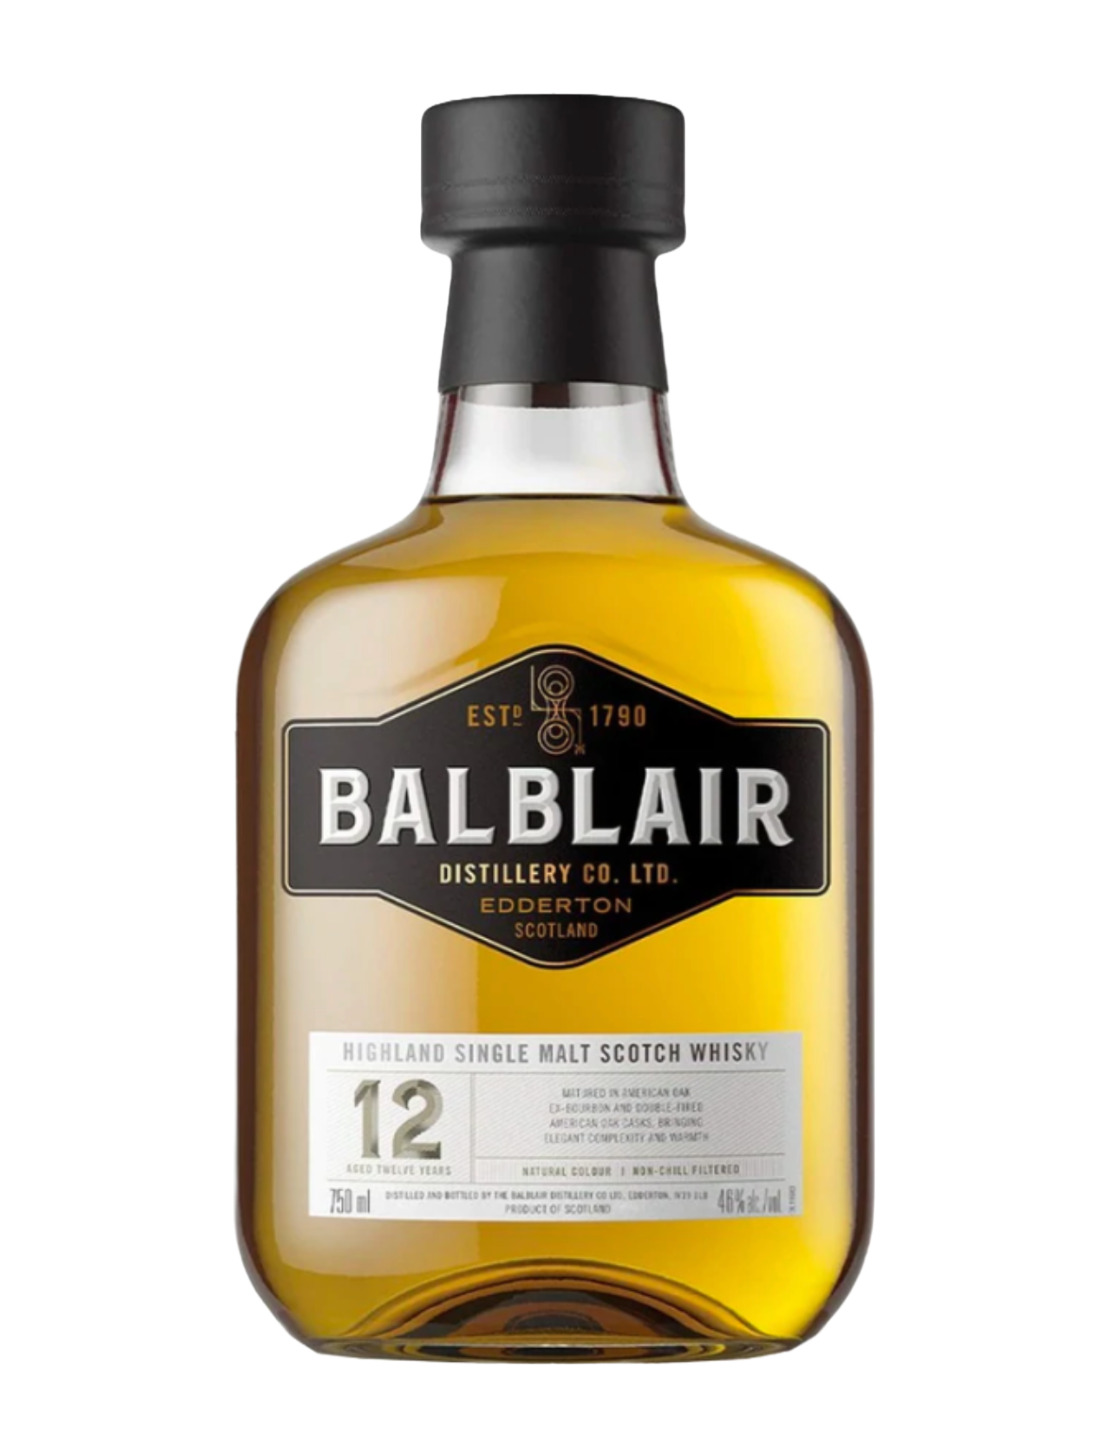 An elegant bottle of Balblair 12 Year Old Single Malt Scotch in front of a plain white background